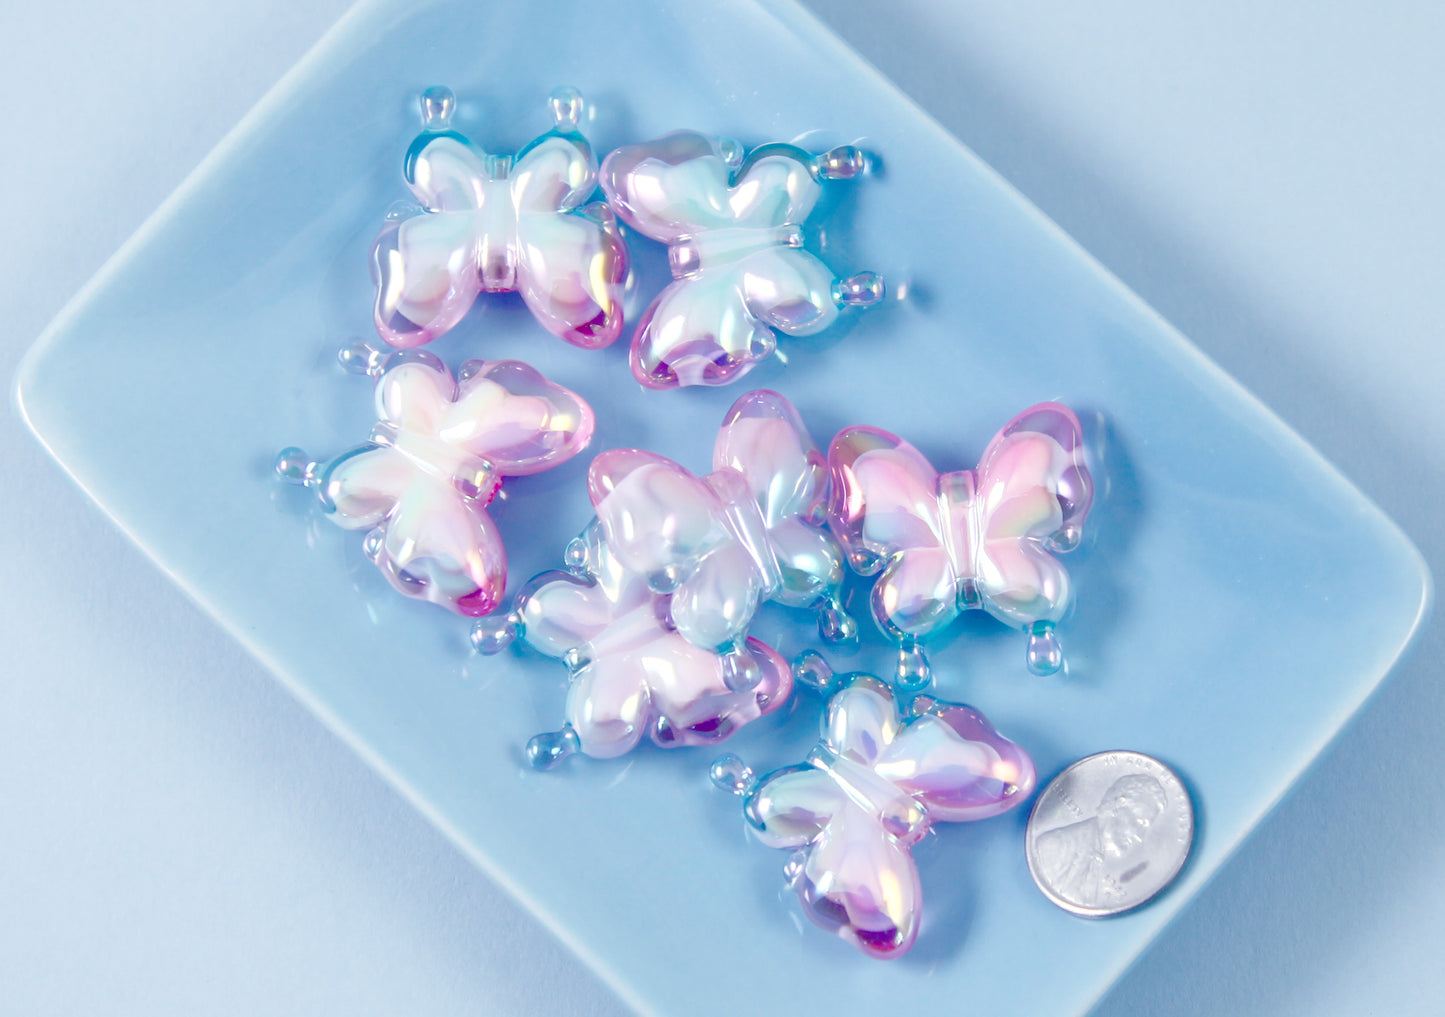 Butterfly Beads - 30mm Pastel Pink and Blue Gradient AB Butterfly Iridescent Acrylic Beads or Resin Beads - 6 pc set